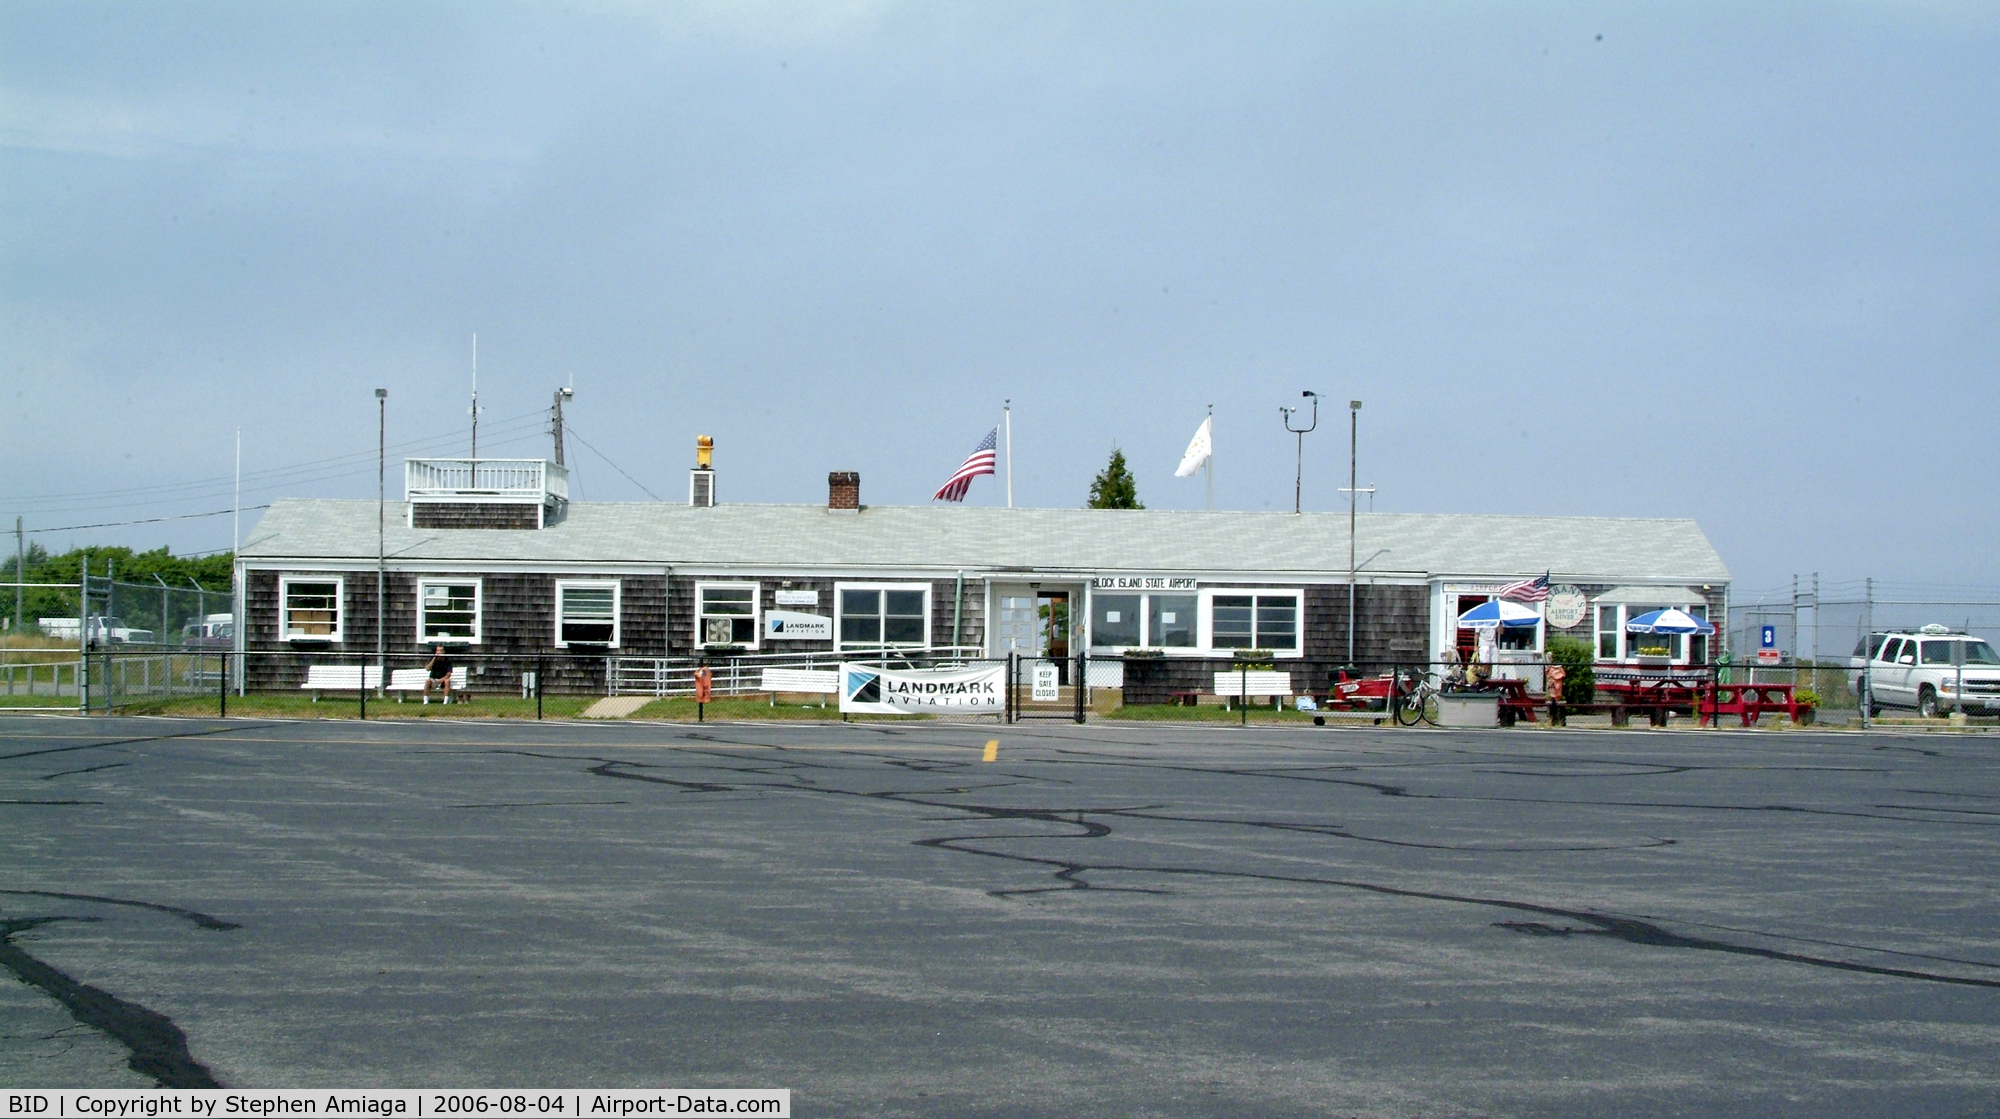 Block Island State Airport (BID) - What you see is what you get here in Block Island. Always a smiling face.  One of the island's 34 cabs on lunch break at R.